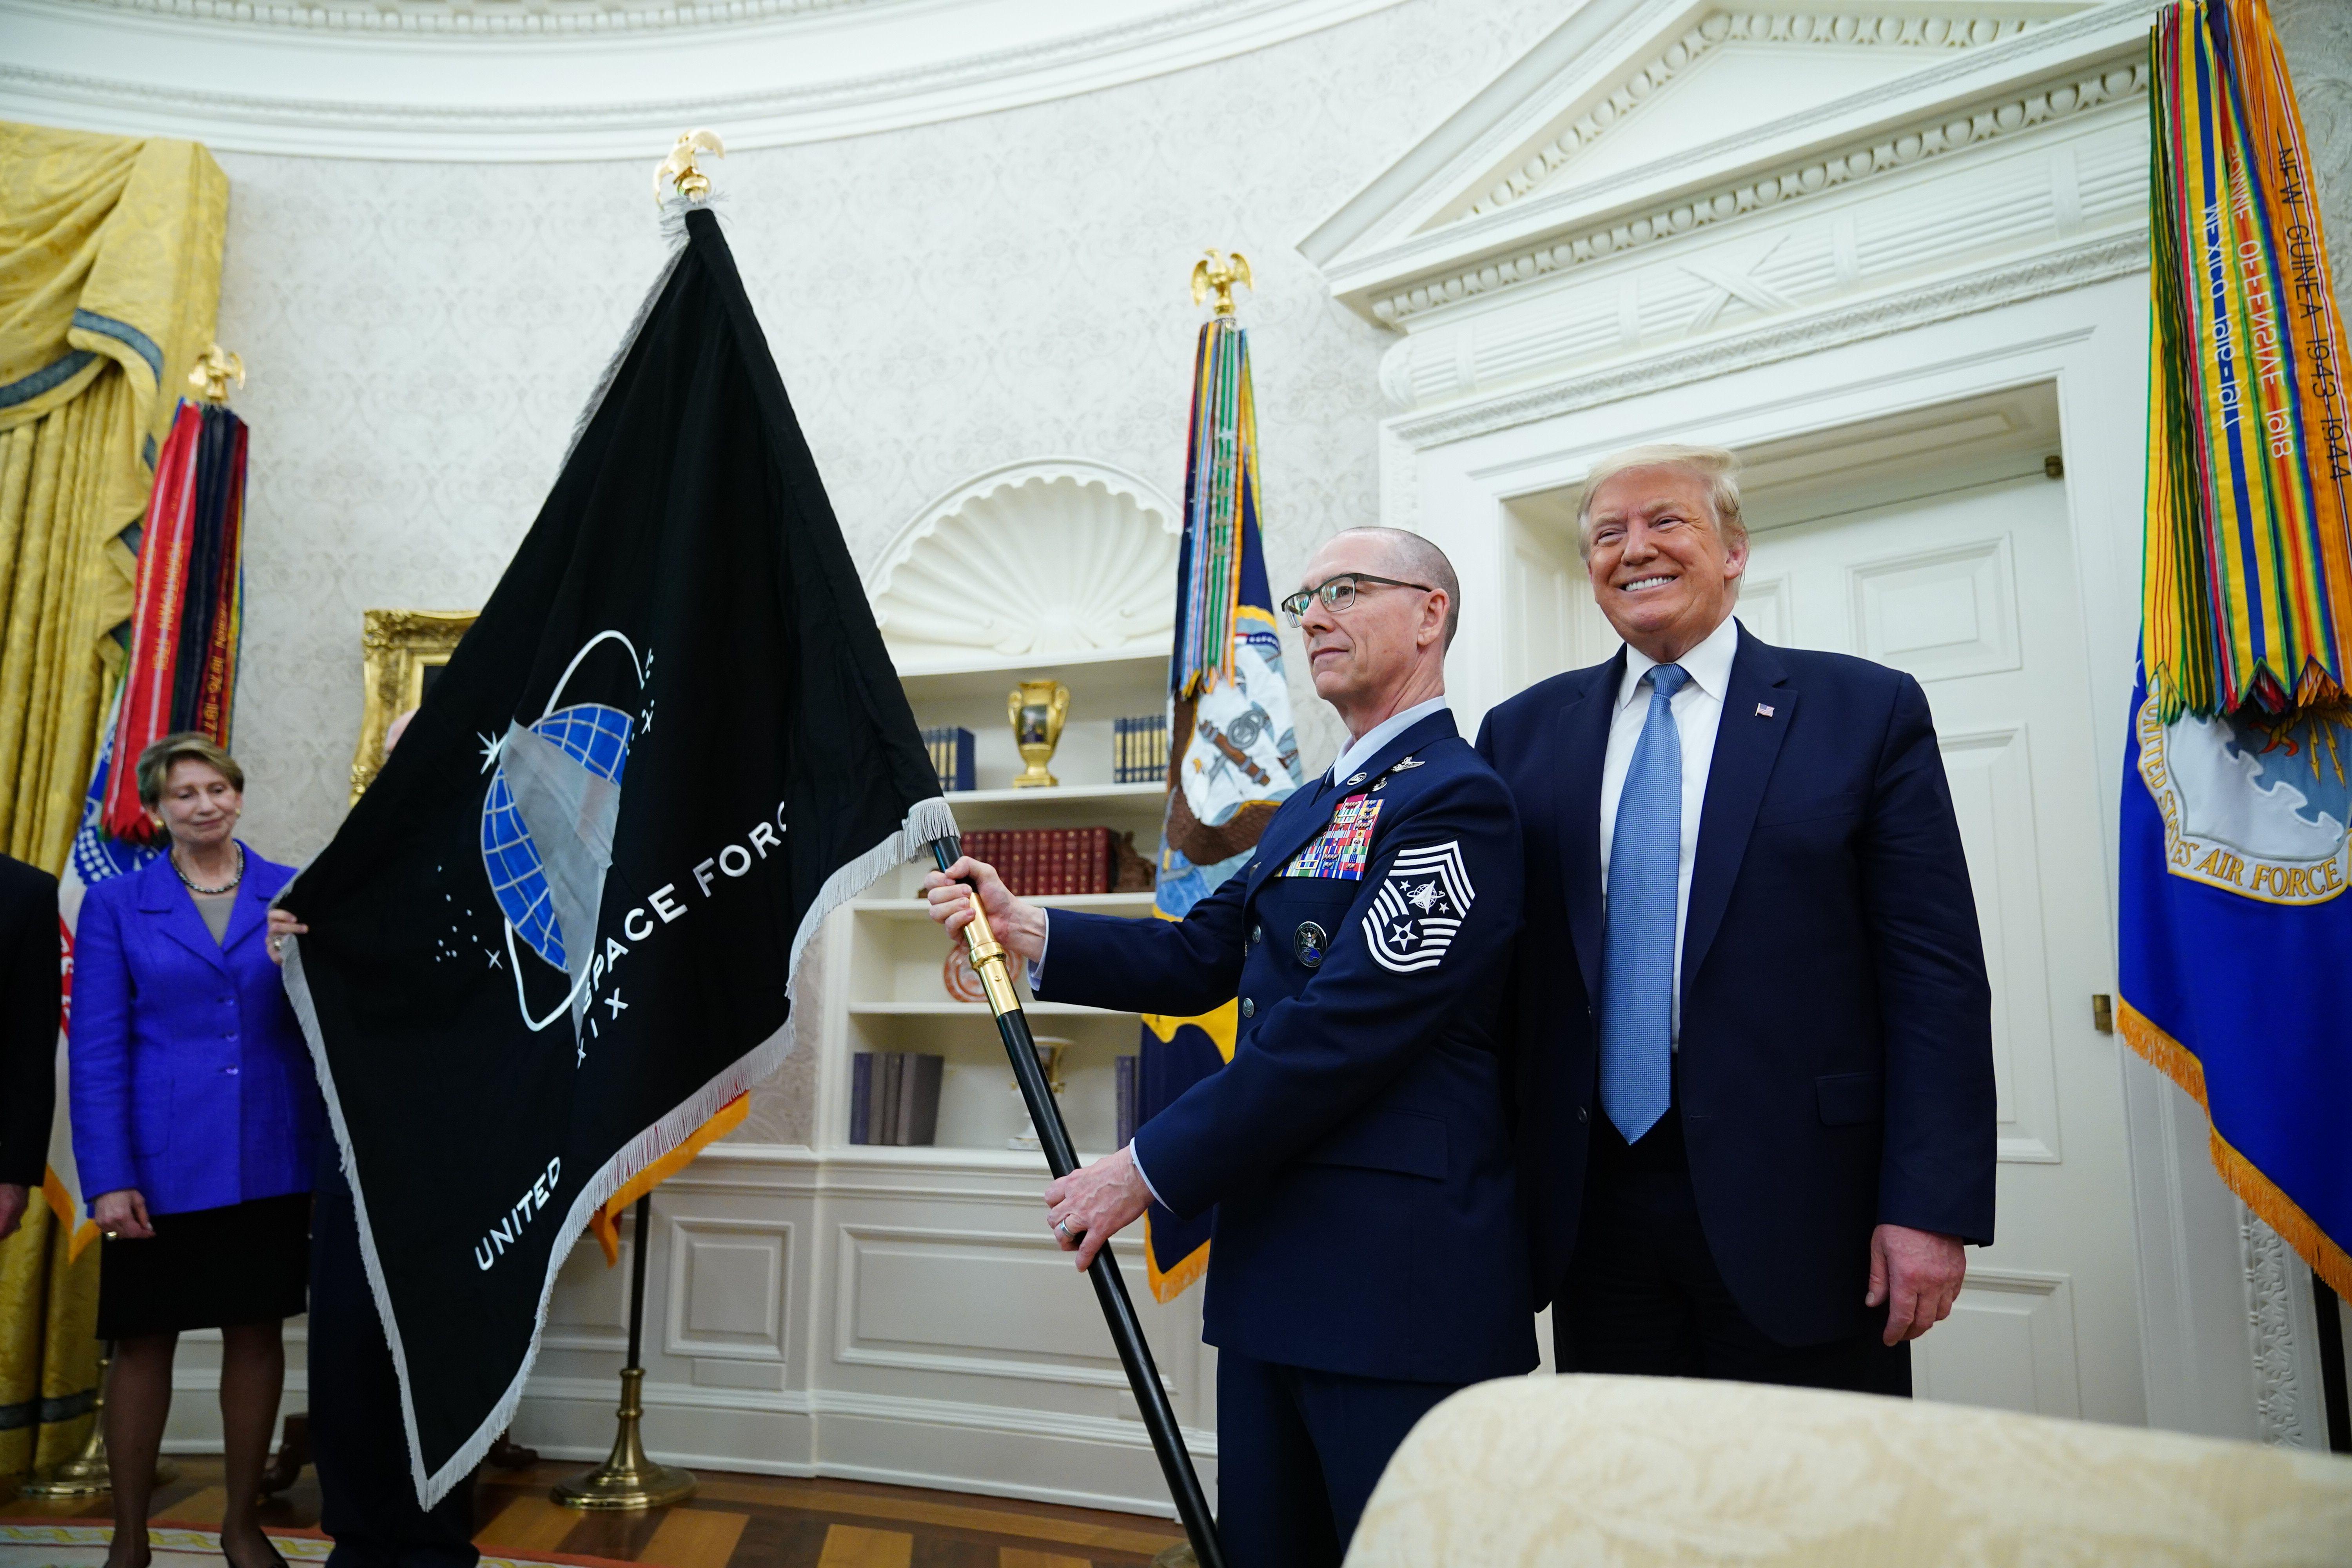 Space Force Senior Enlisted Advisor CMSgt Roger Towberman, with President Donald Trump, presents the Space Force Flag on May 15, 2020, in the Oval Office of the White House.